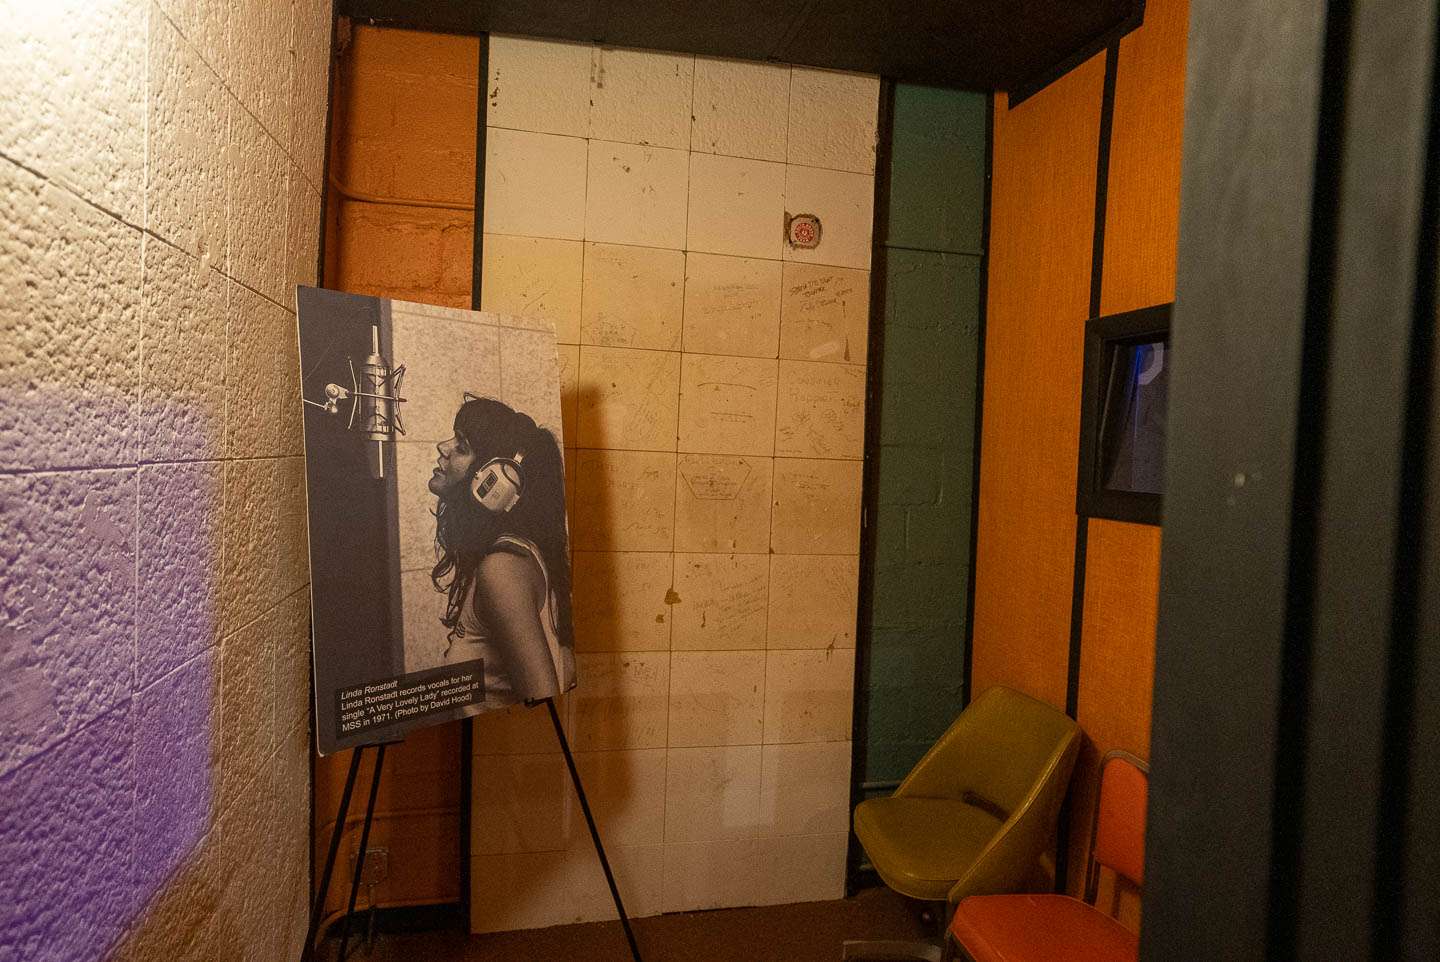 Linda Rondstadt was one of many vocalists that recorded in this booth. 